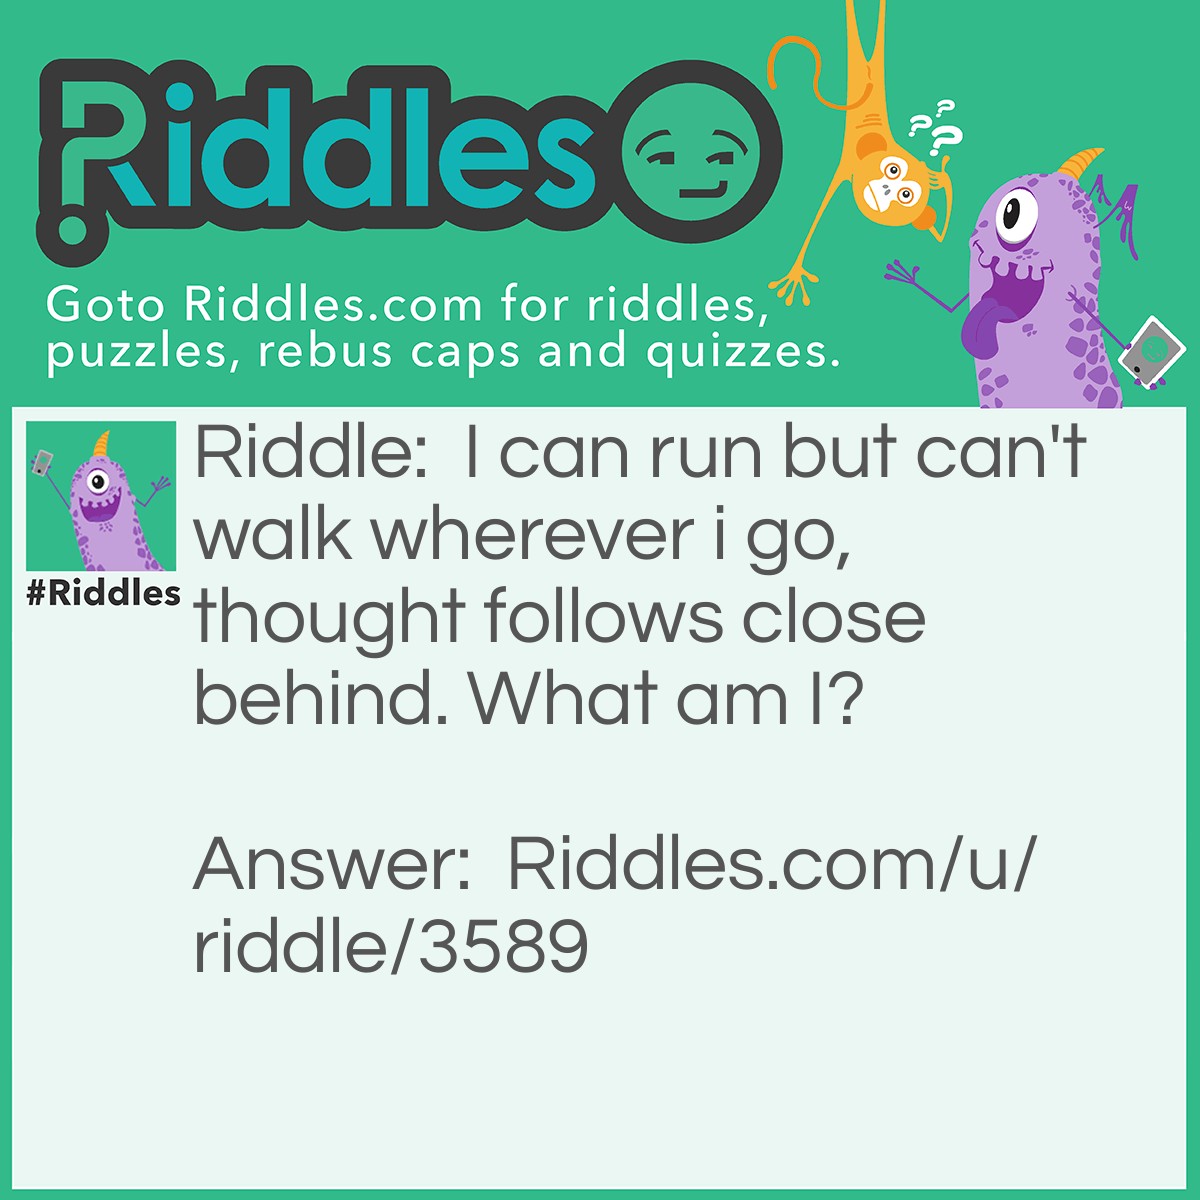 Riddle: I can run but can't walk wherever i go, thought follows close behind. What am I? Answer: A nose.